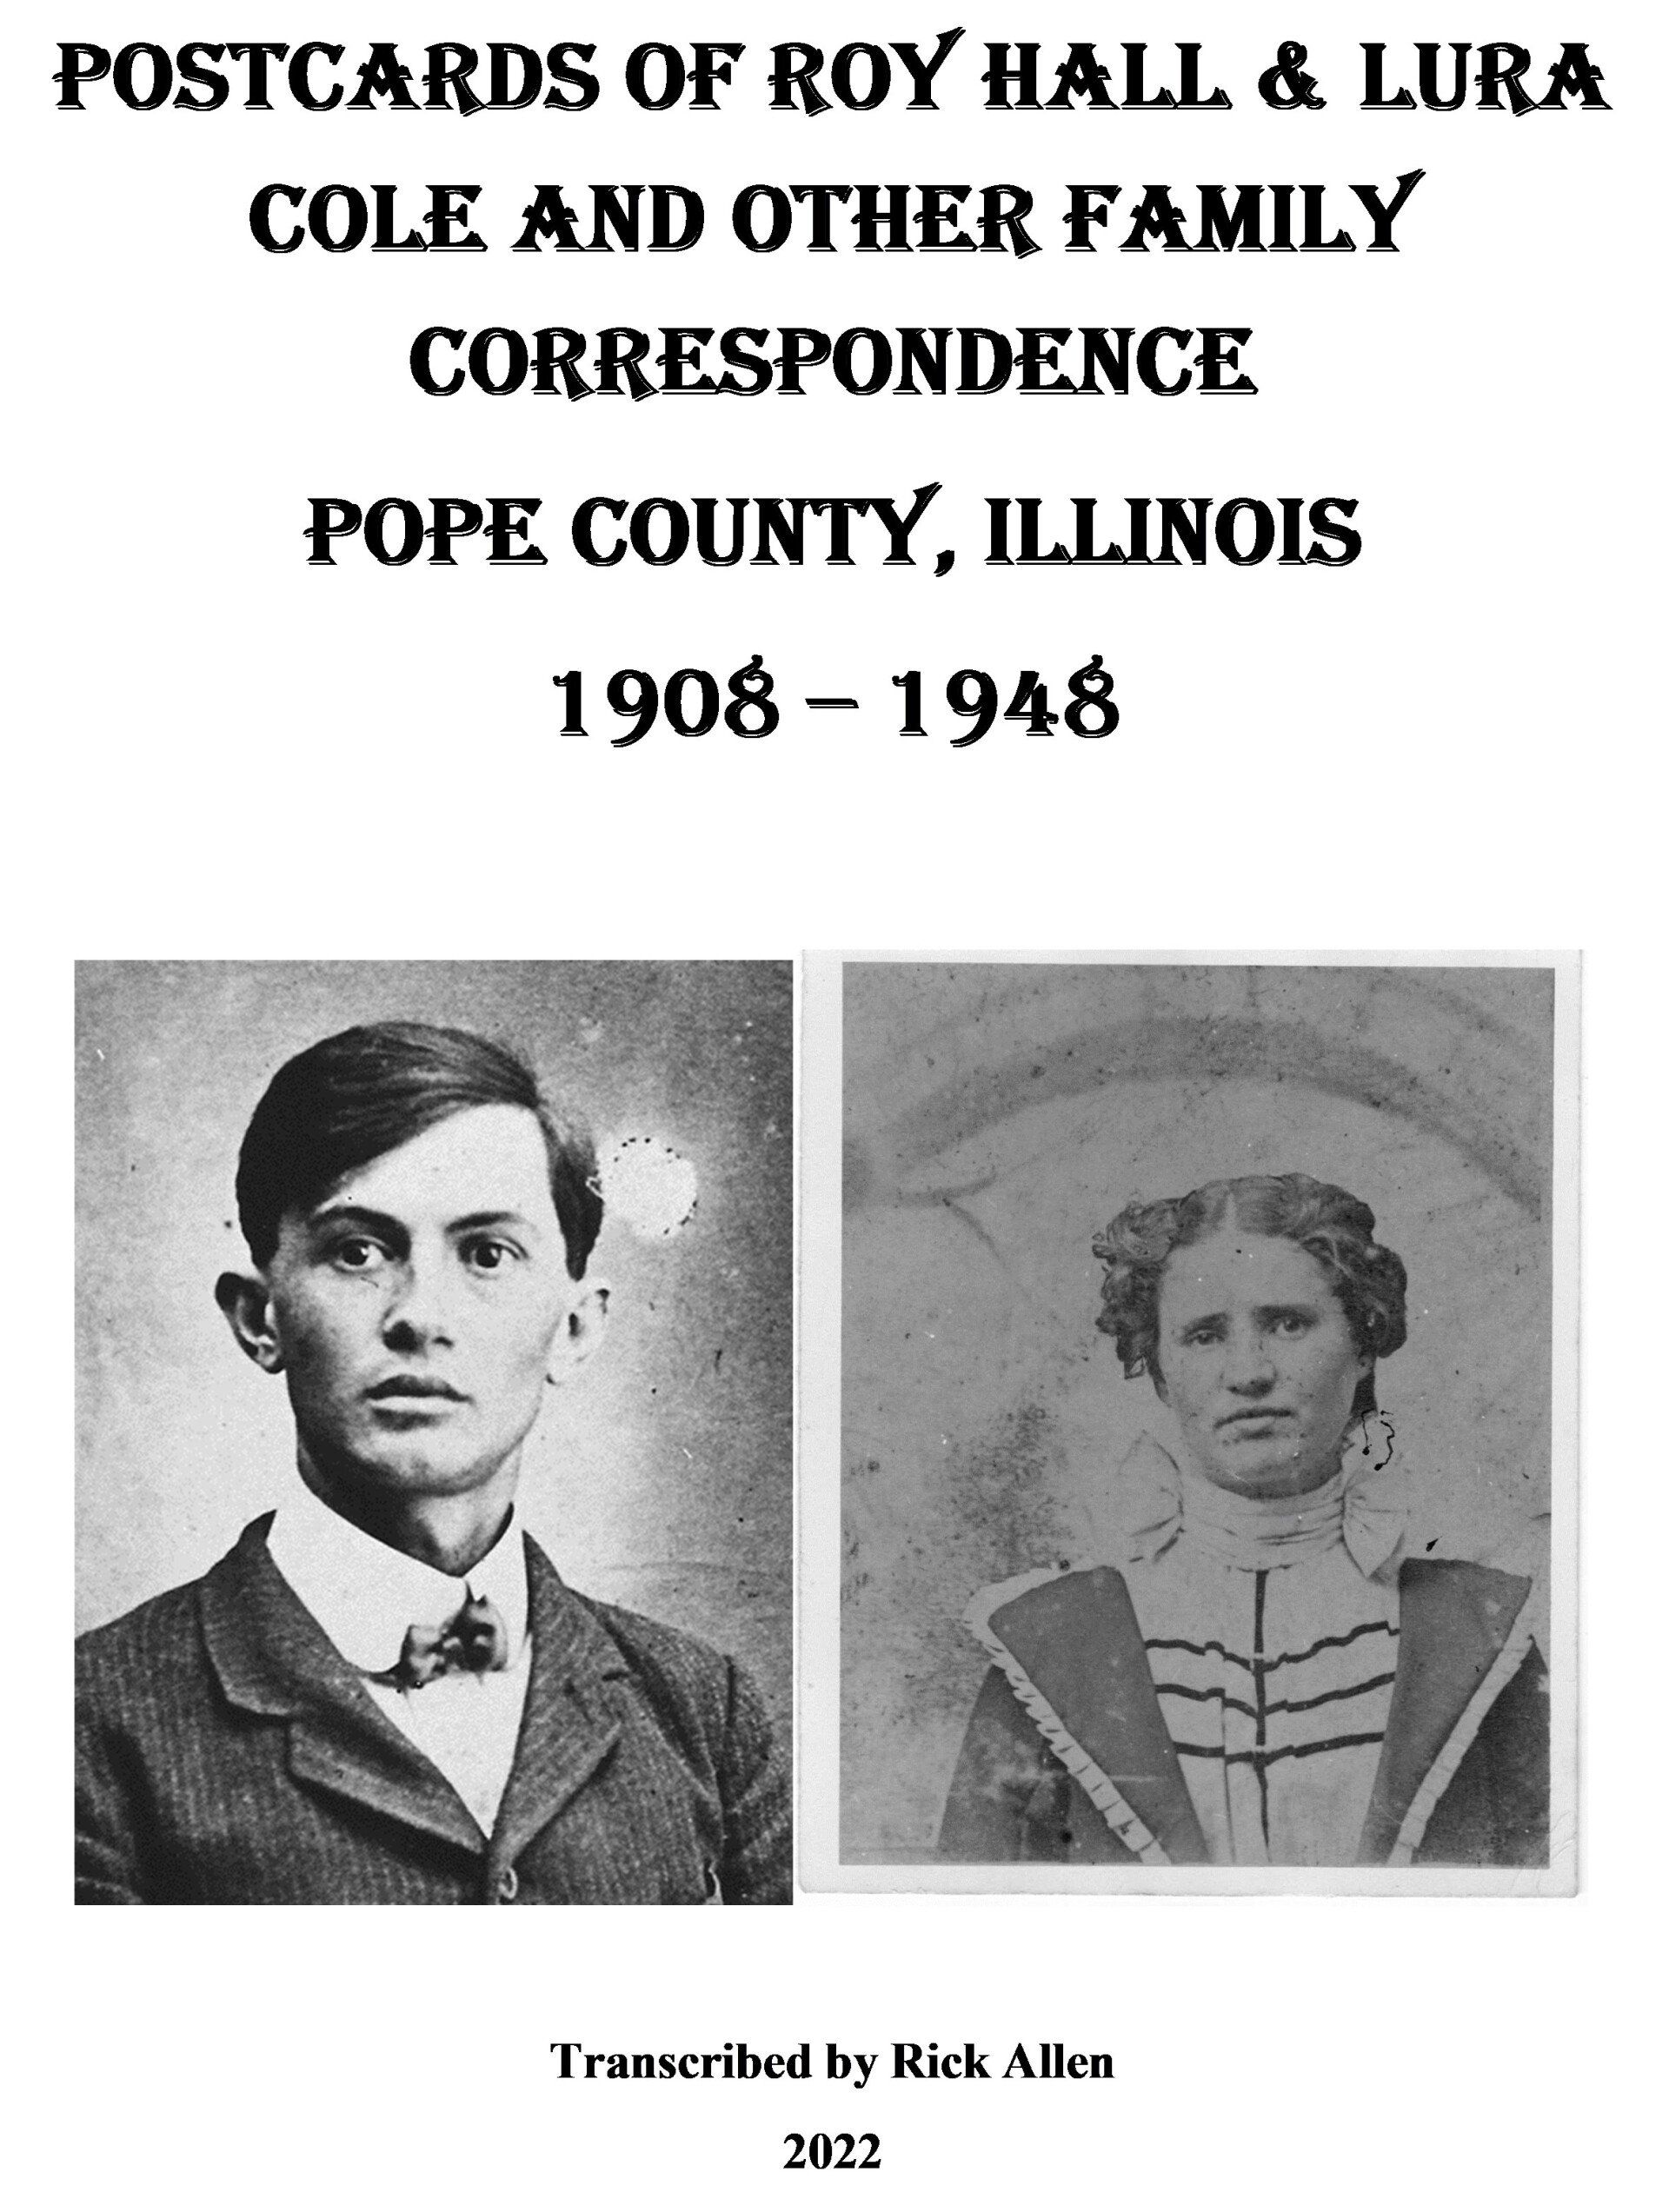 New Publication - Postcards of Roy Hall and Lura Cole and Other Family Correspondence, 1908 - 1948